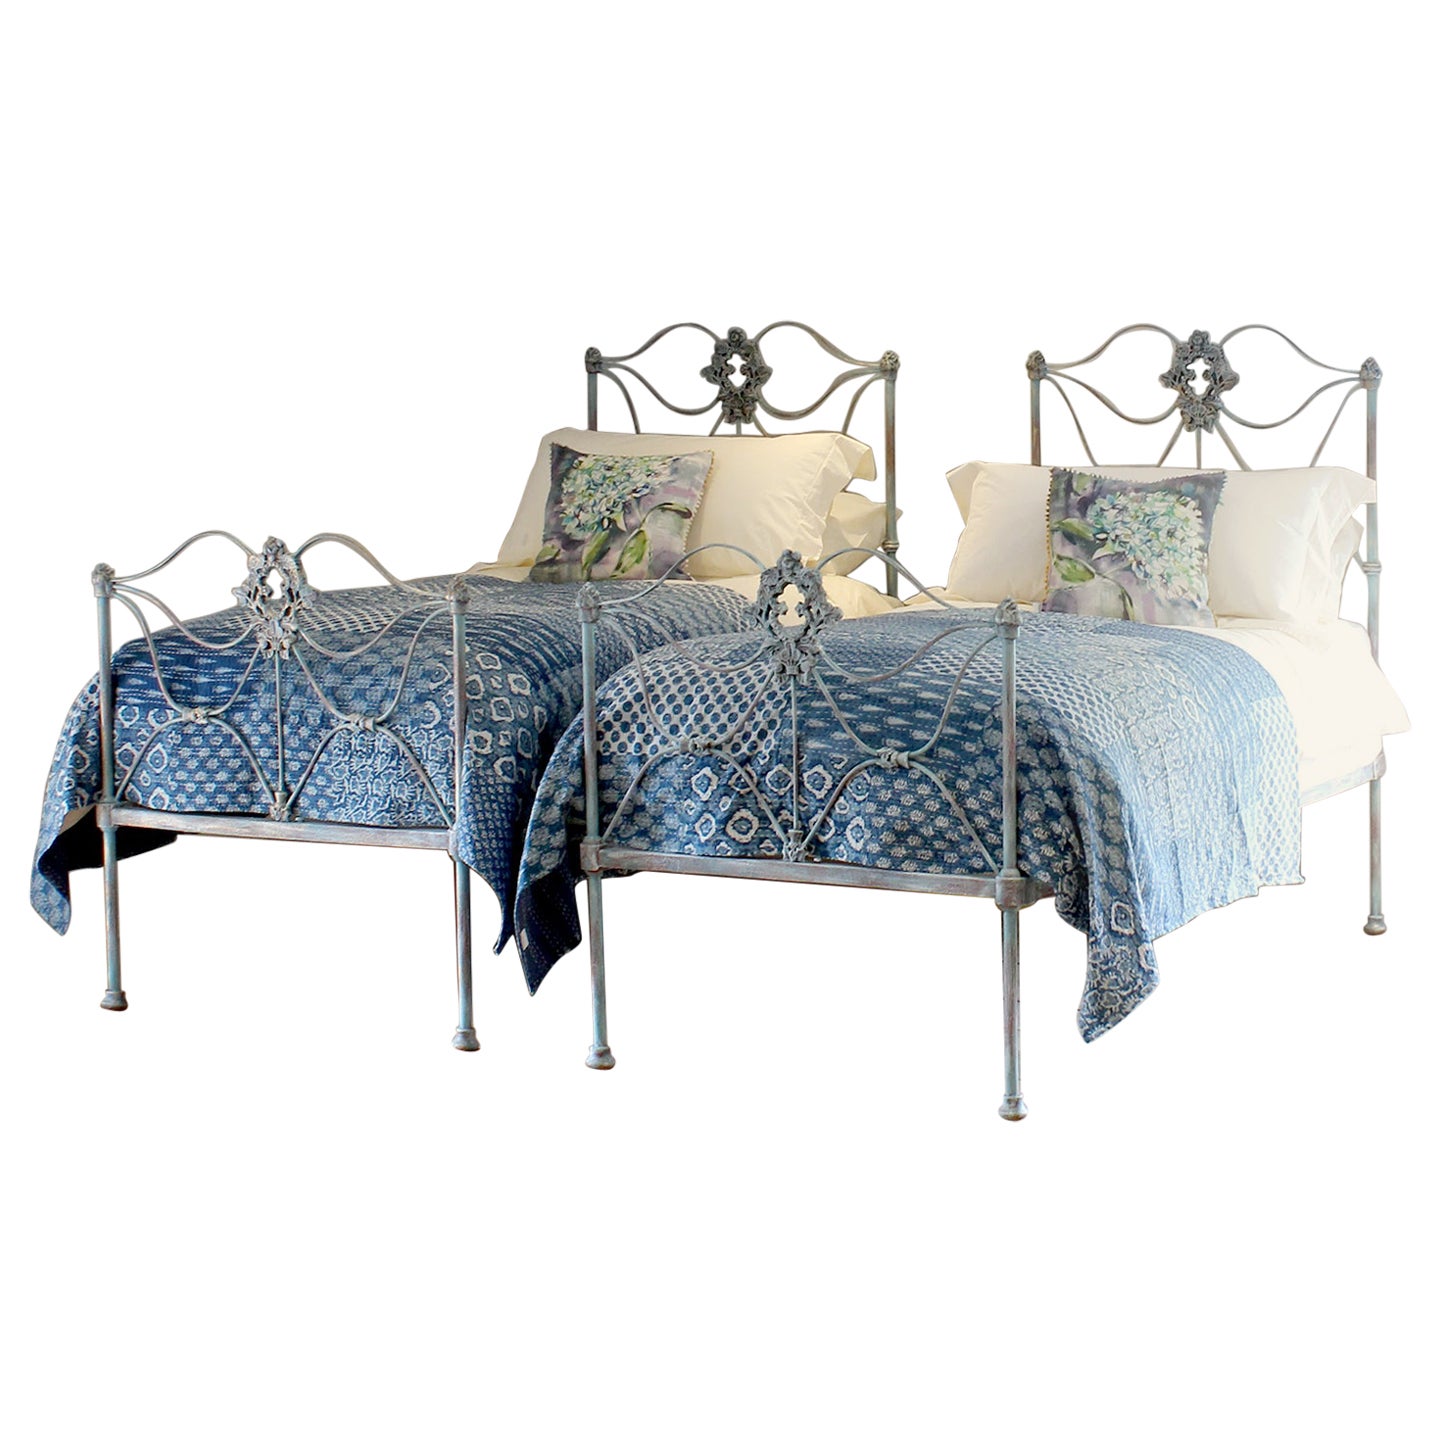 Matching Pair of Single Antique Beds, MP59